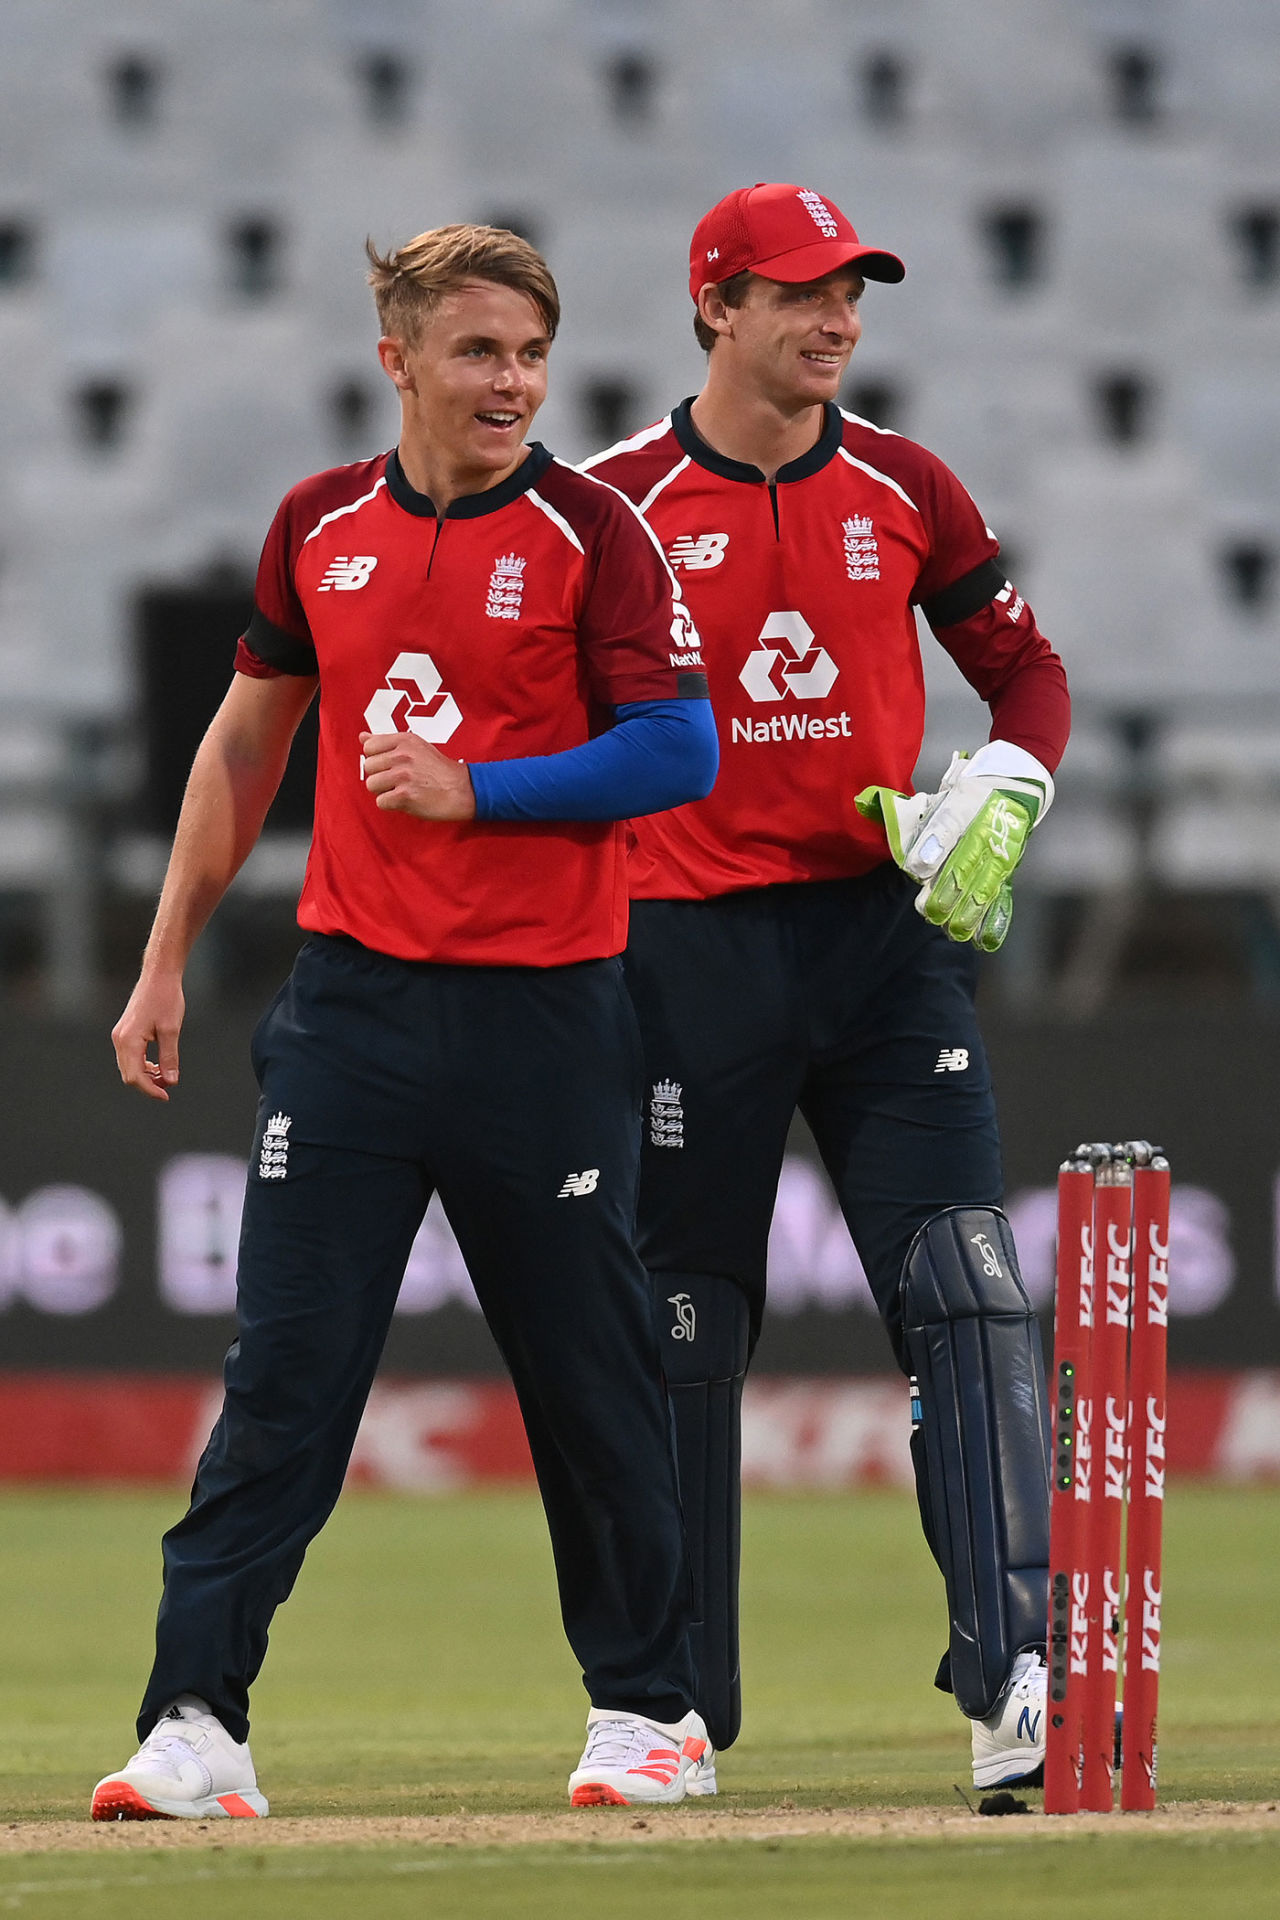 Sam Curran and Jos Buttler celebrate another England breakthrough, South Africa v England, 1st T20I, Cape Town, November 27, 2020